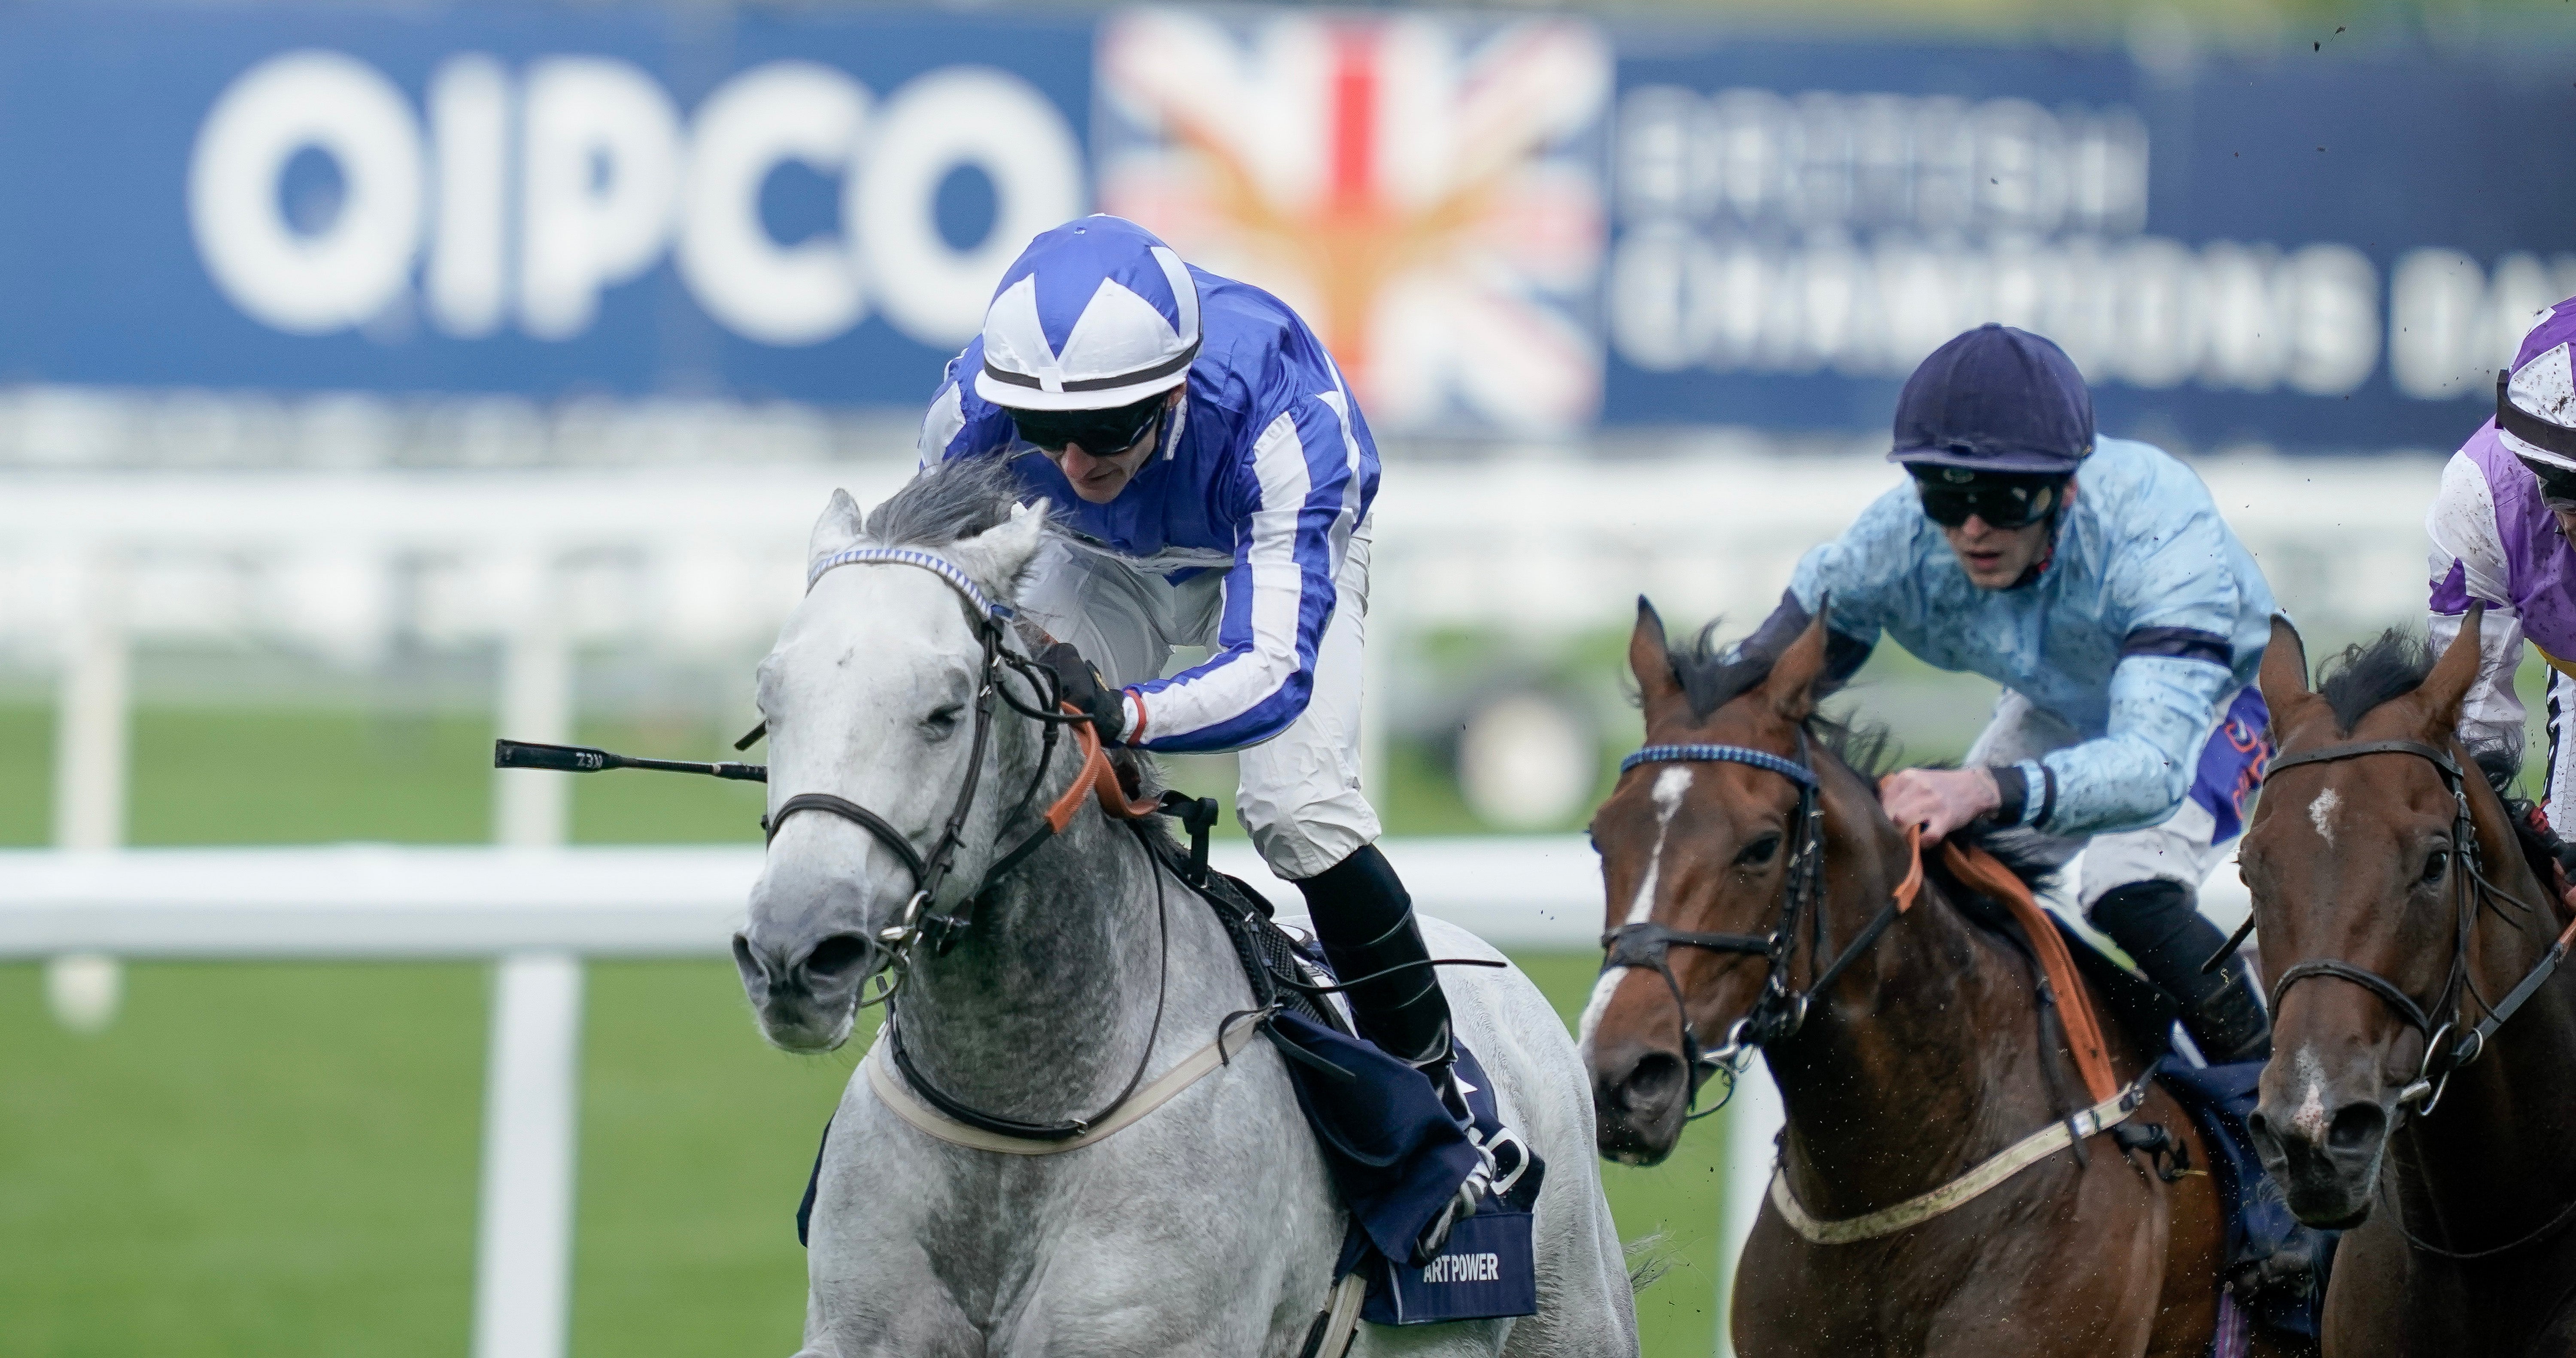 David Allan riding Art Power to win The Qipco British Champions Sprint Stakes at Ascot Racecourse